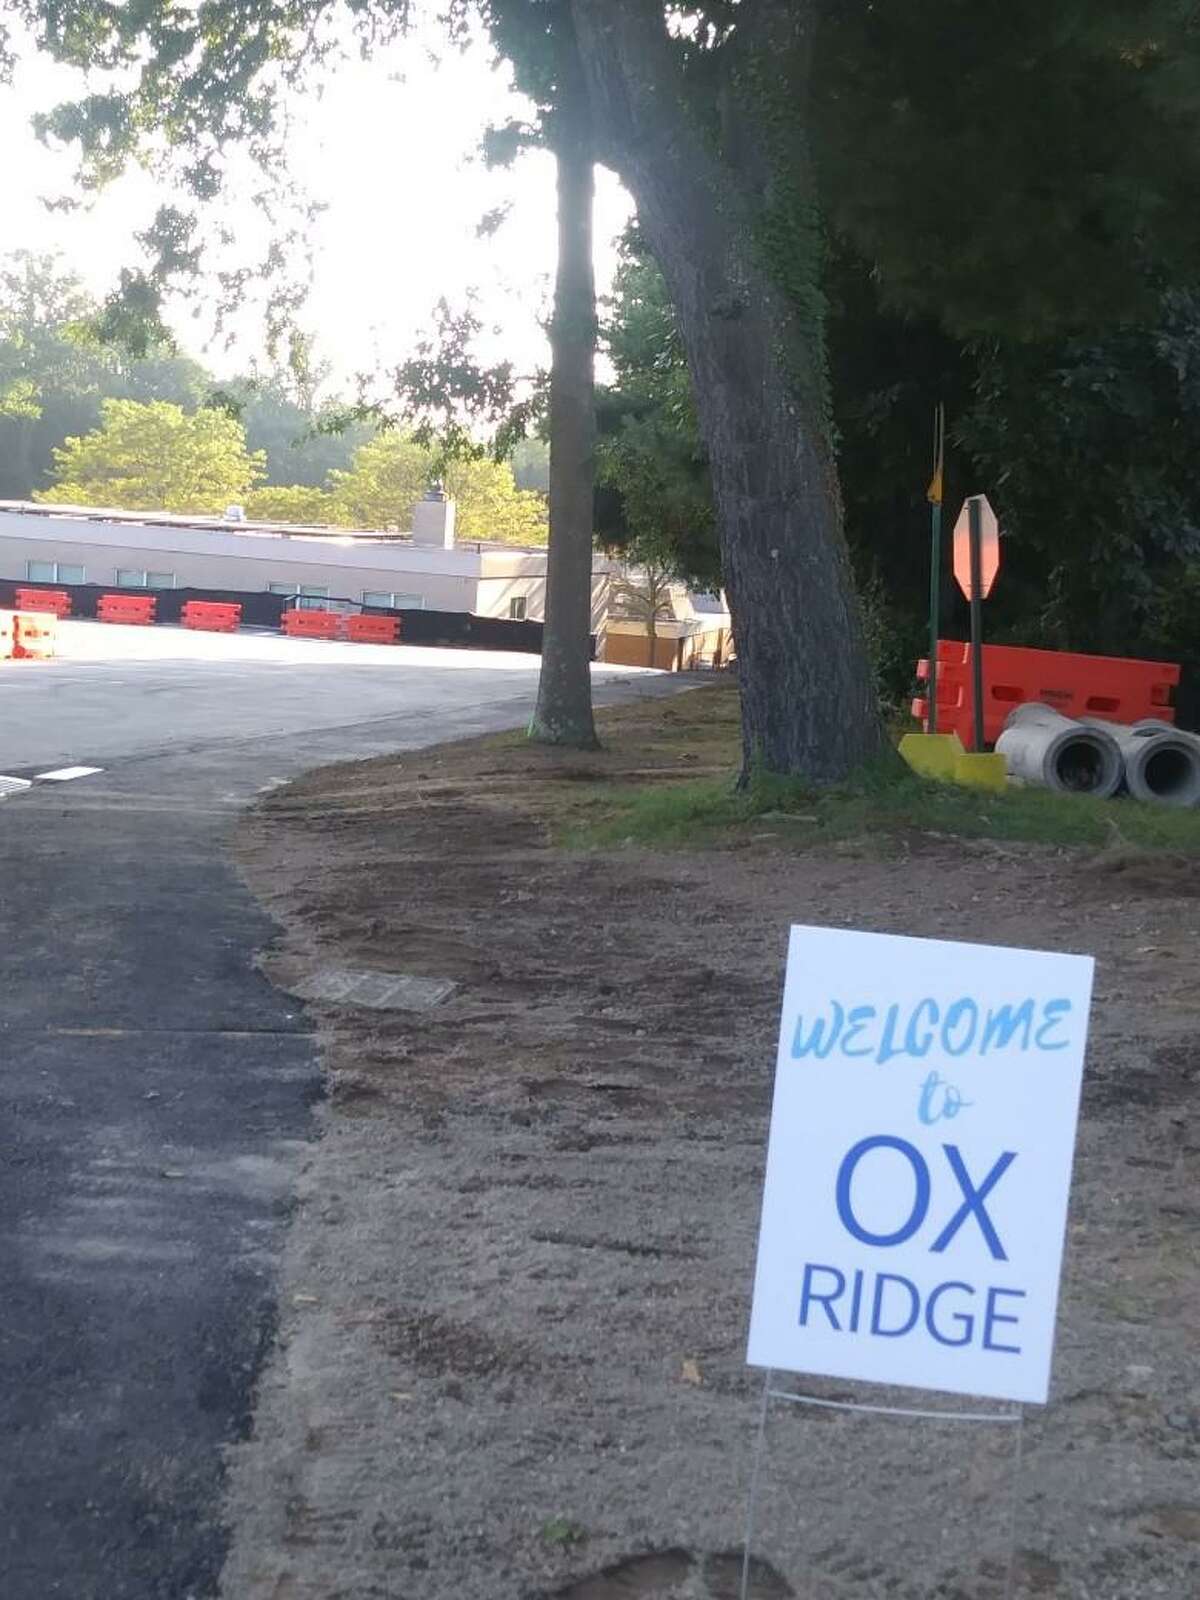 Ox Ridge School will open for students Aug. 30 as construction on the new structure continues on site. Darien schools are opening for the 2021-22 school year on Aug. 30.